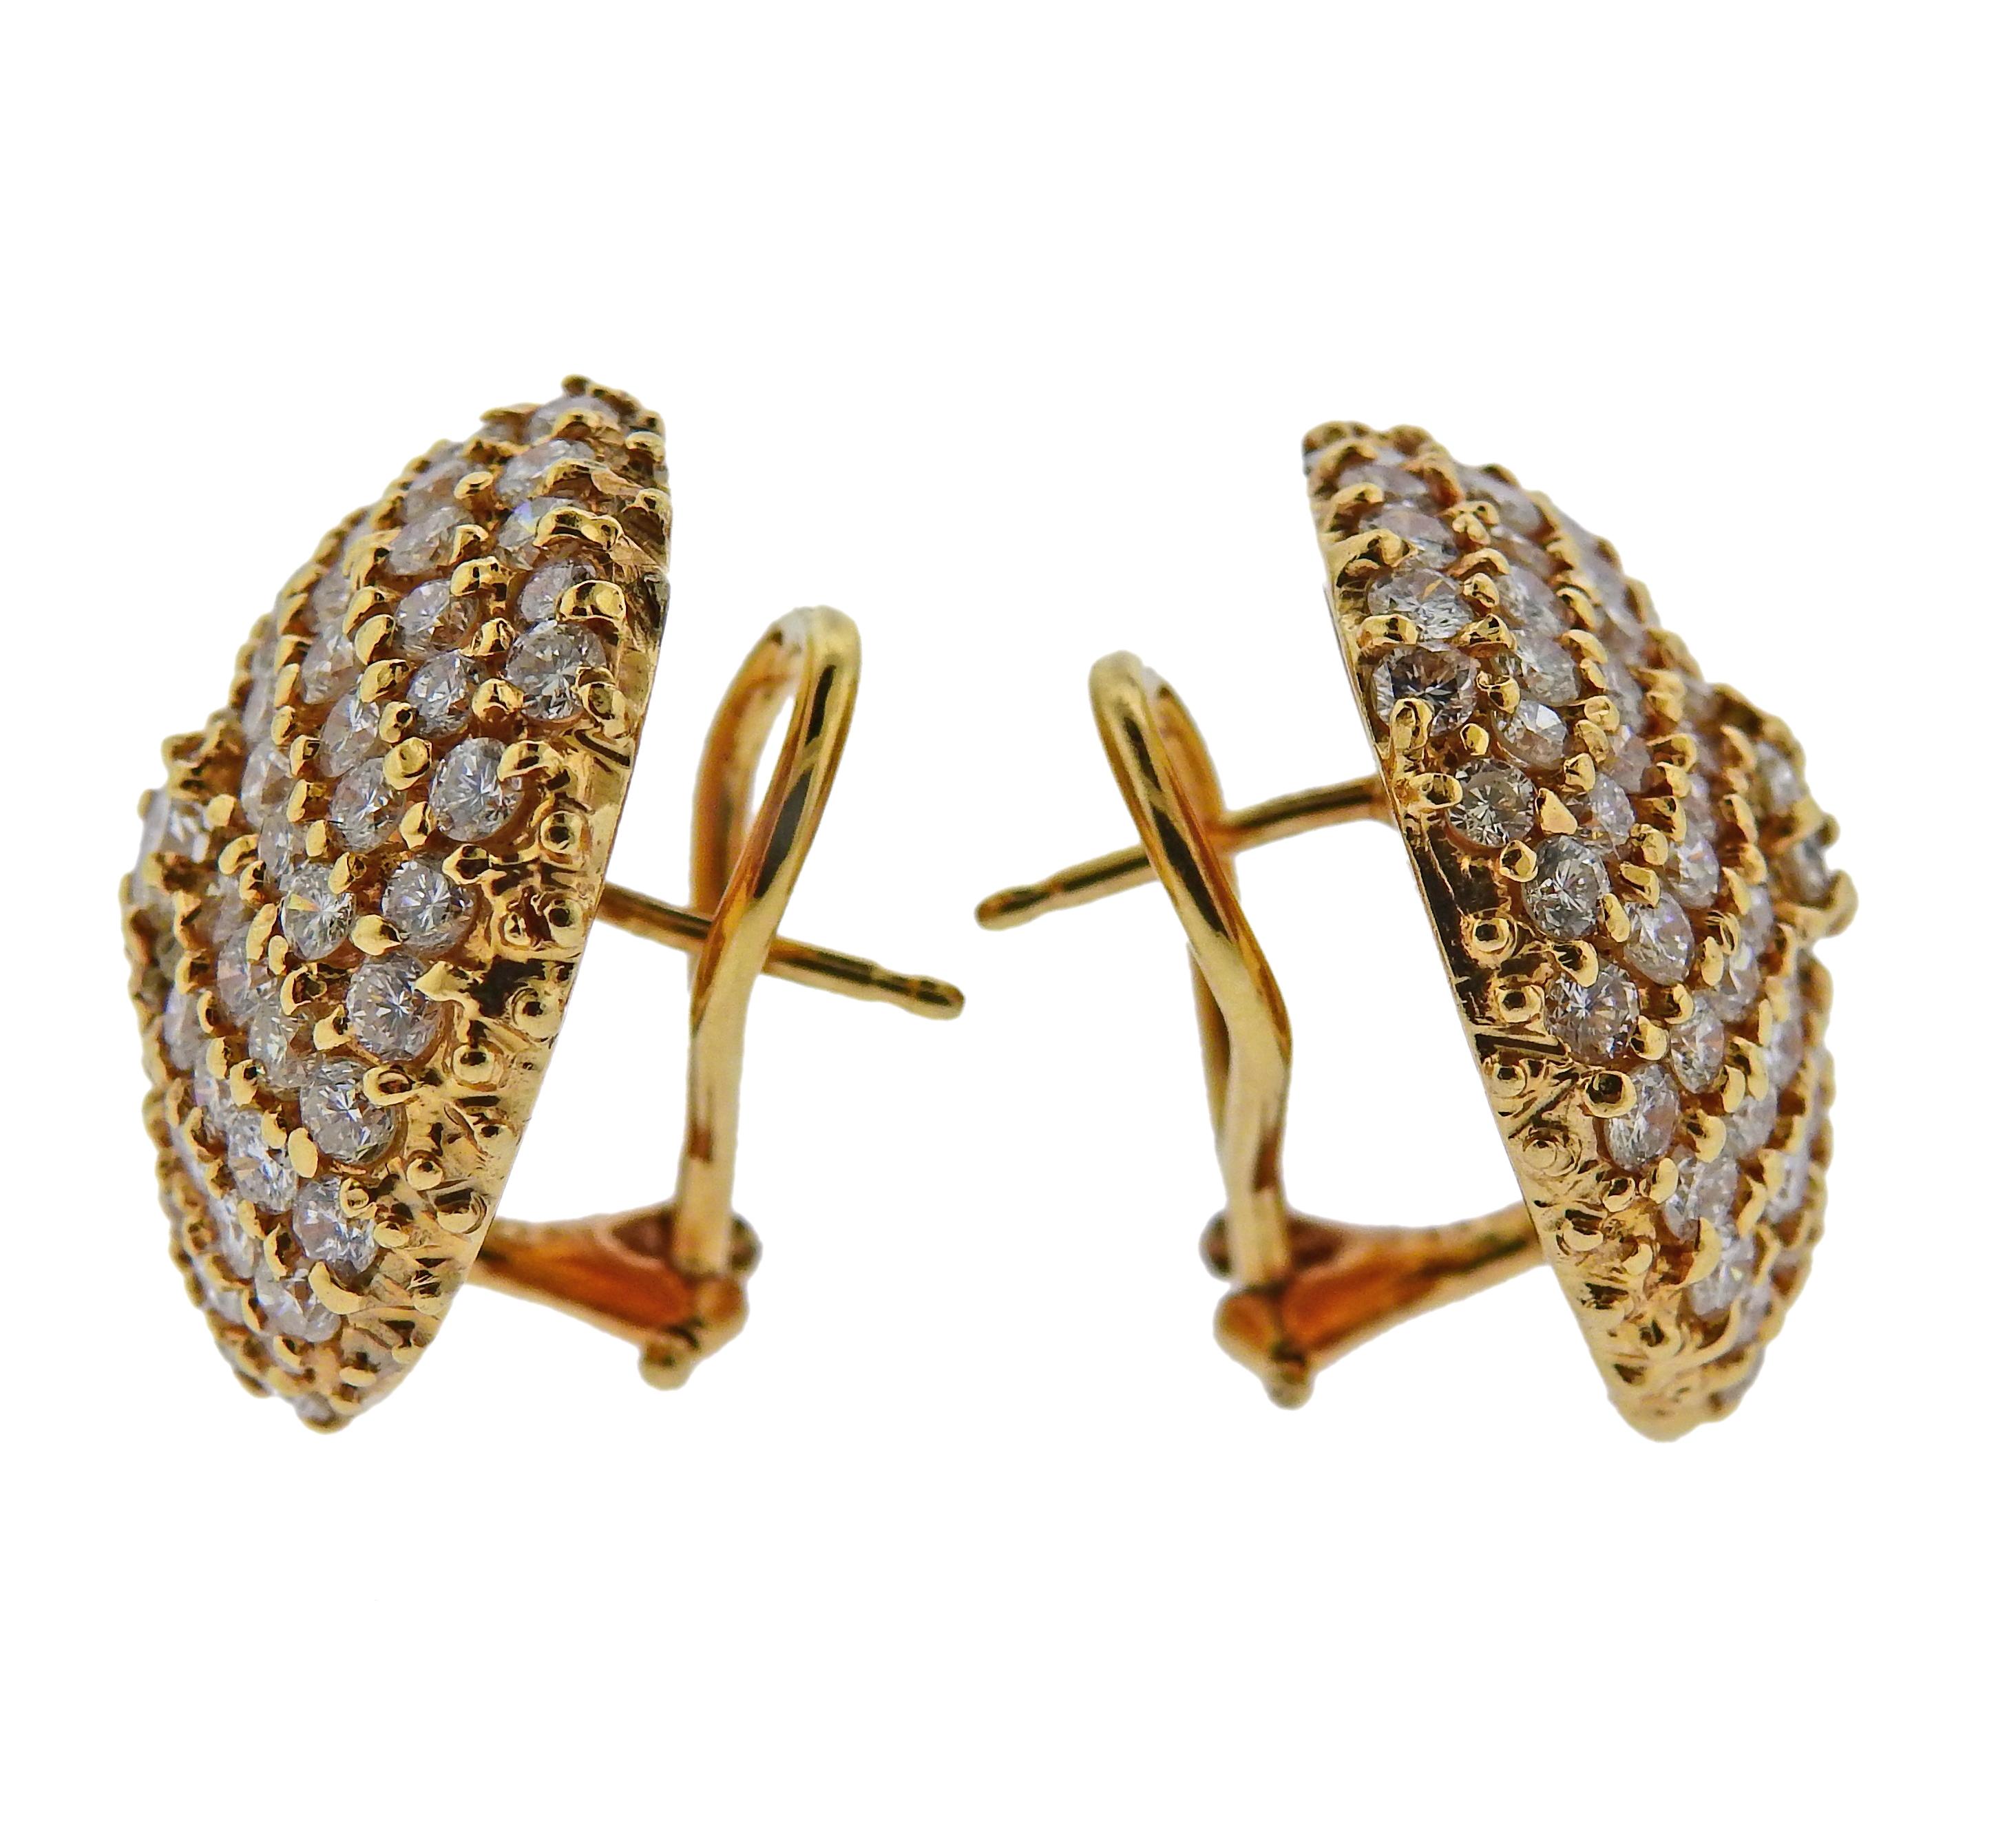 Pair of 14k gold round earrings, set with approx. 3.50ctw in diamonds. Earrings are 22mm in diameter. Marked 14k, weigh 16.9 grams.

SKU#E-02755